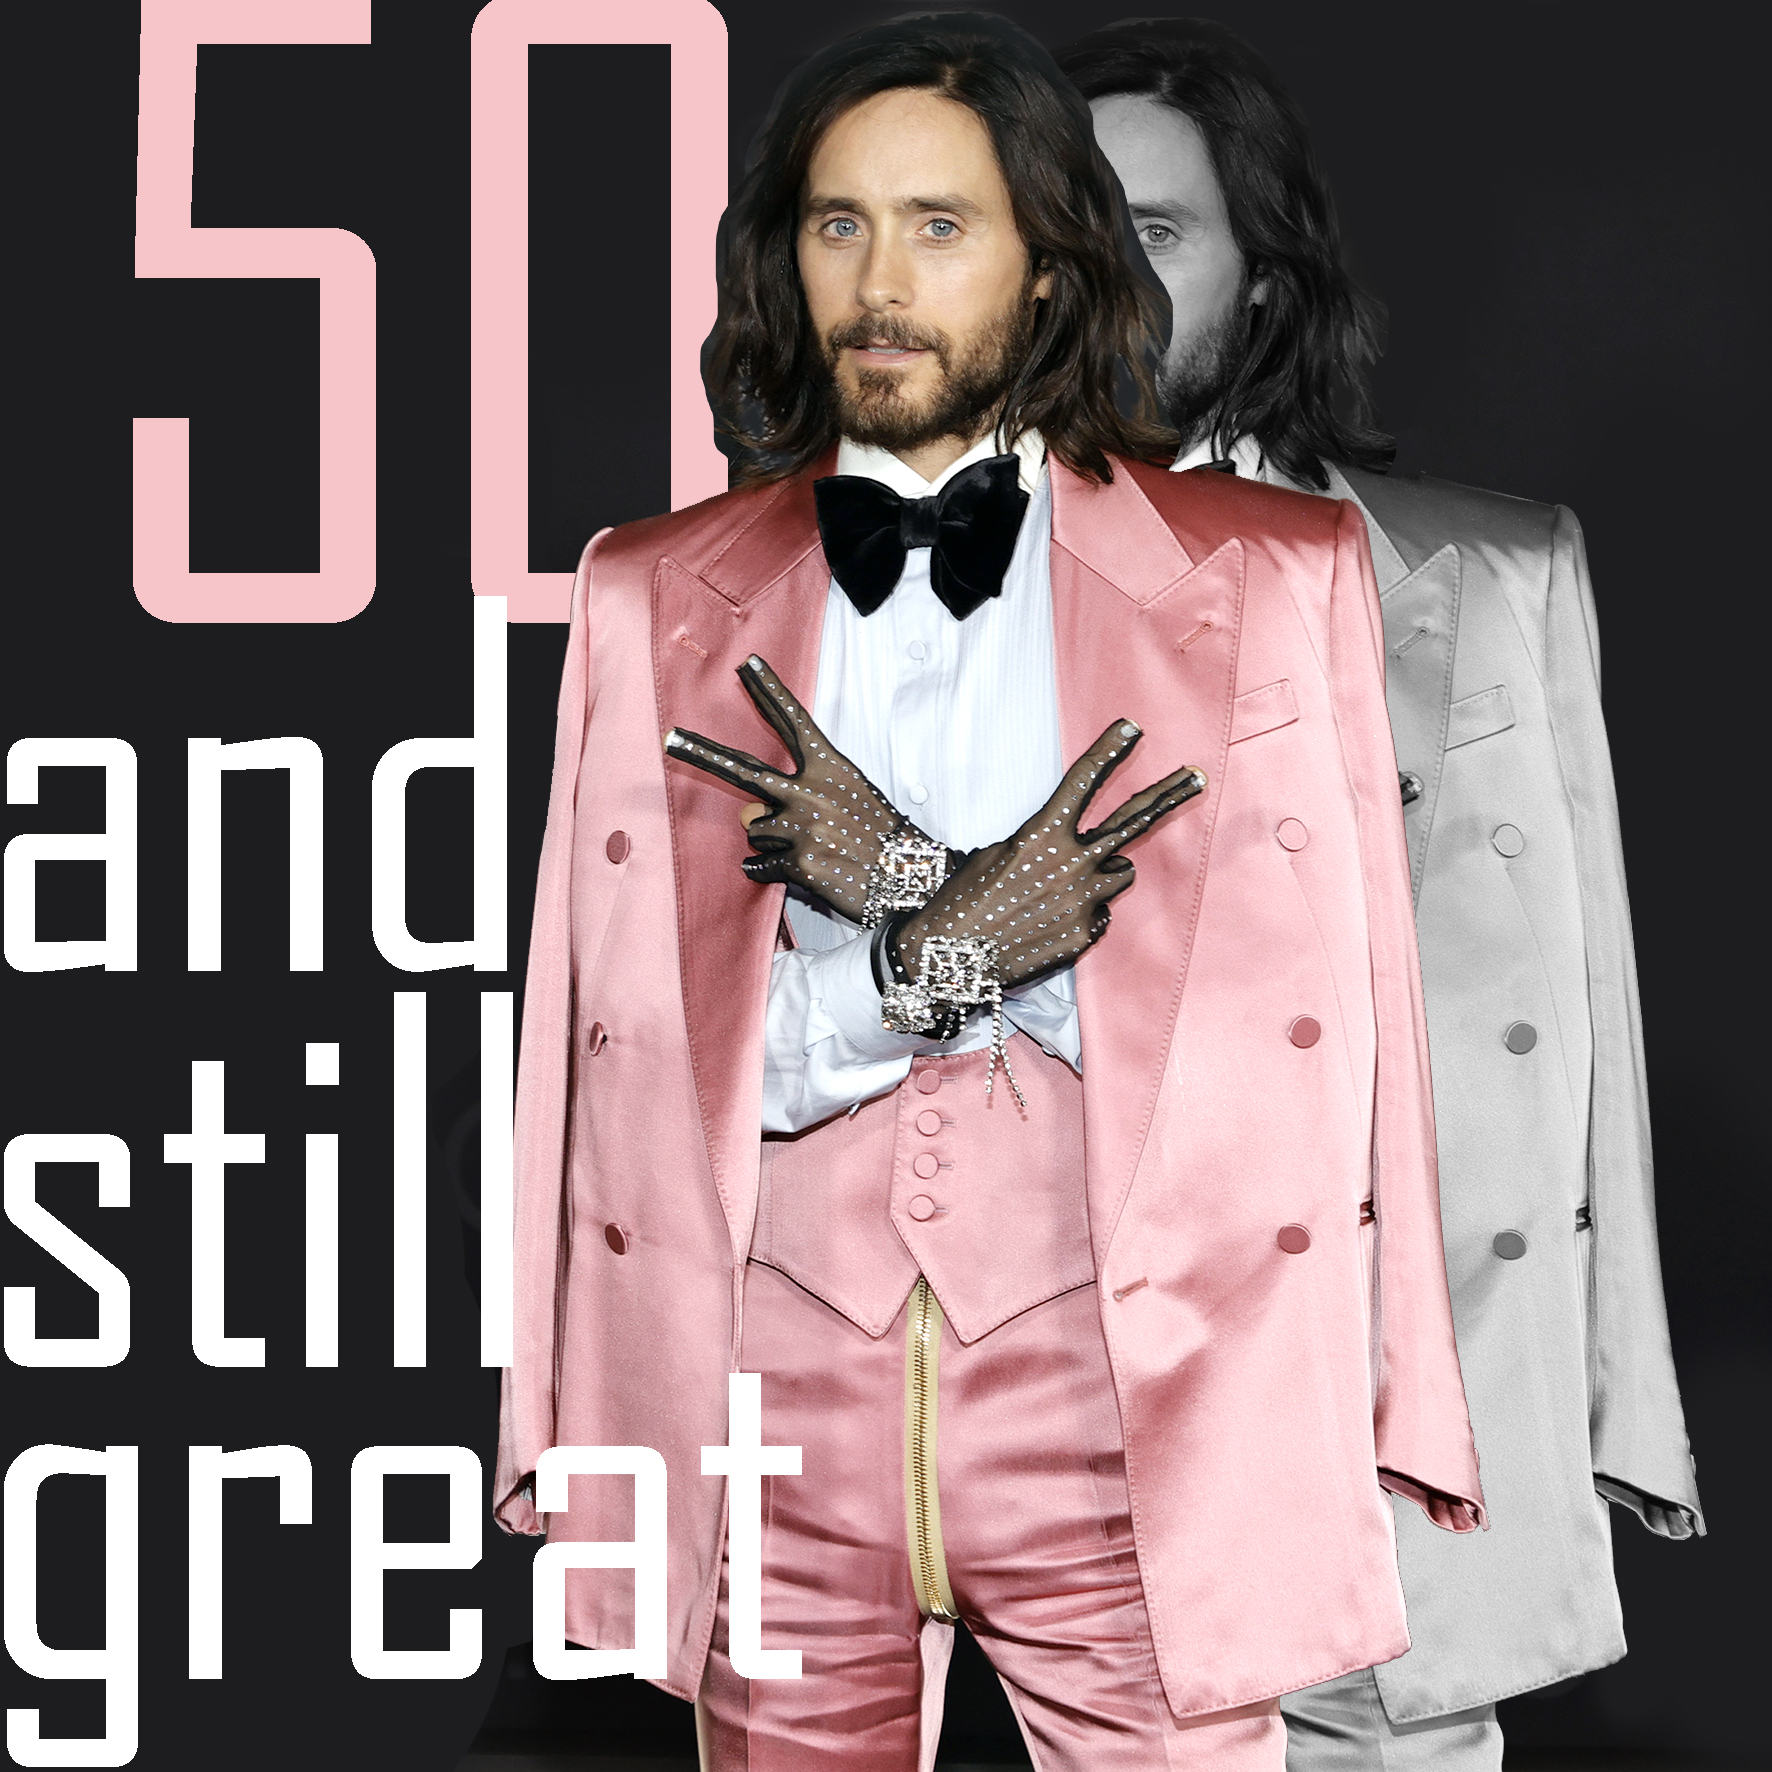 Jared Leto: 50 and still great!